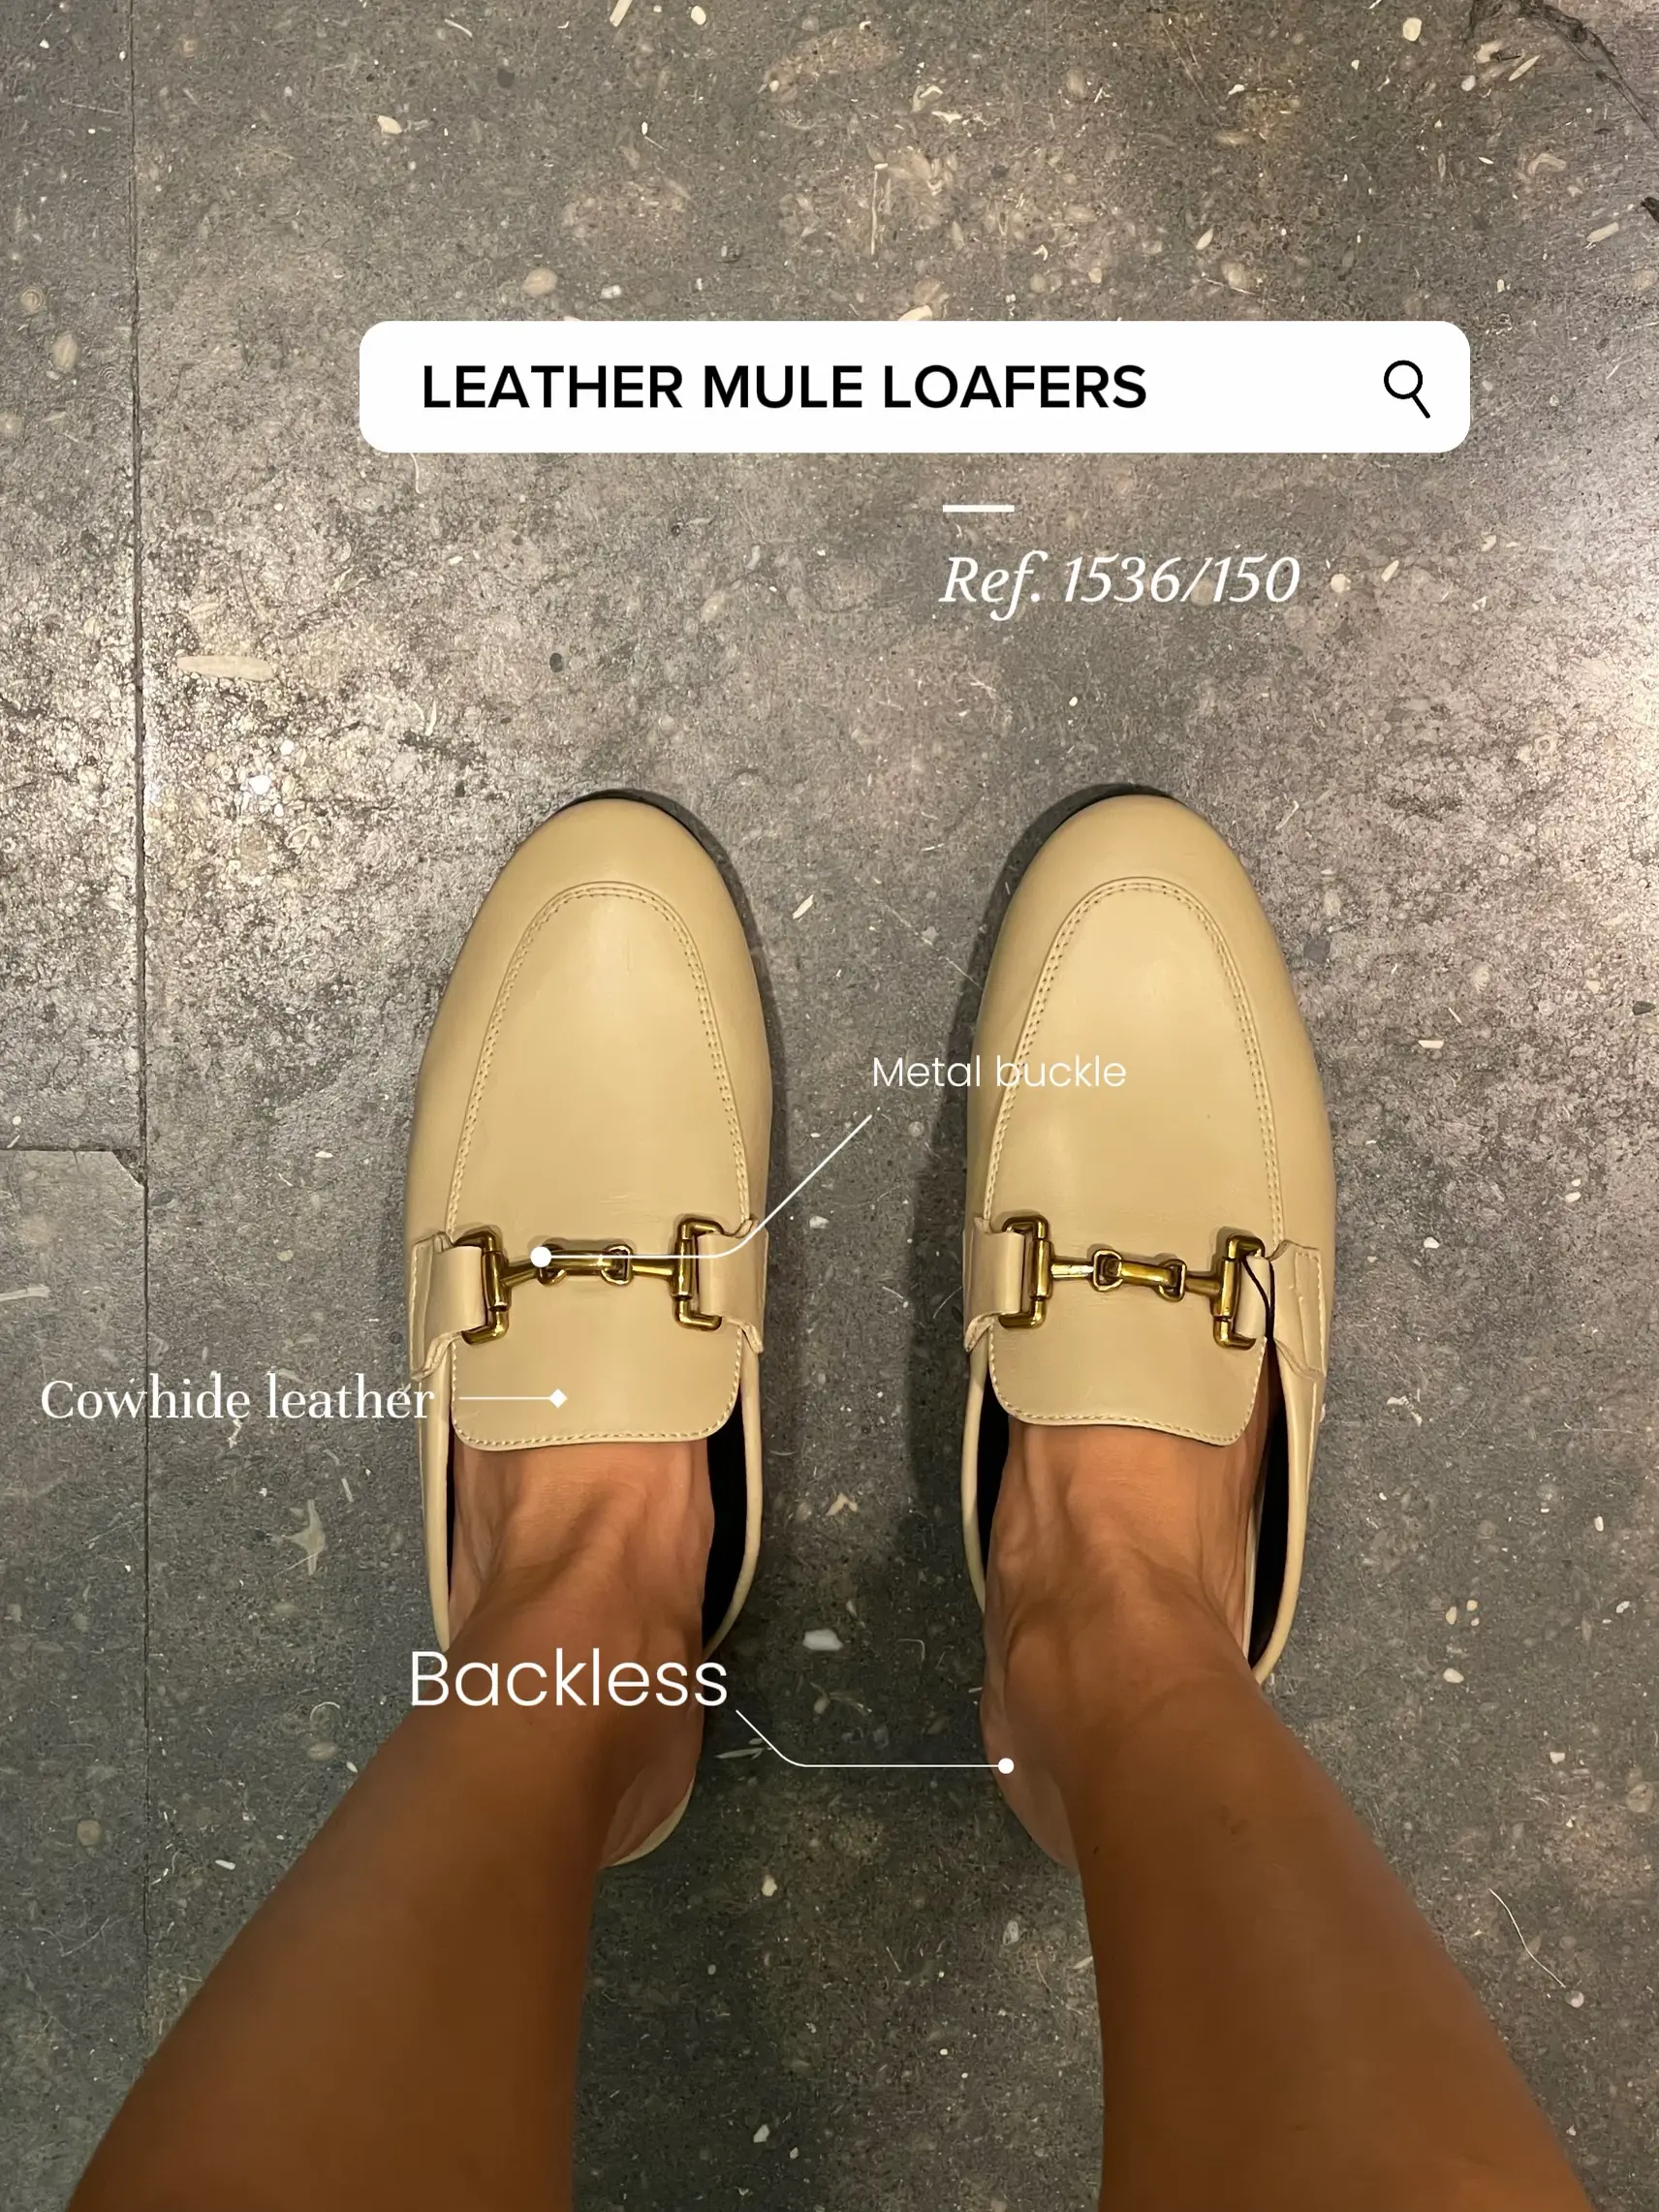 New Leather Loafers at Durti Review | Gallery by Kristine Lemon8